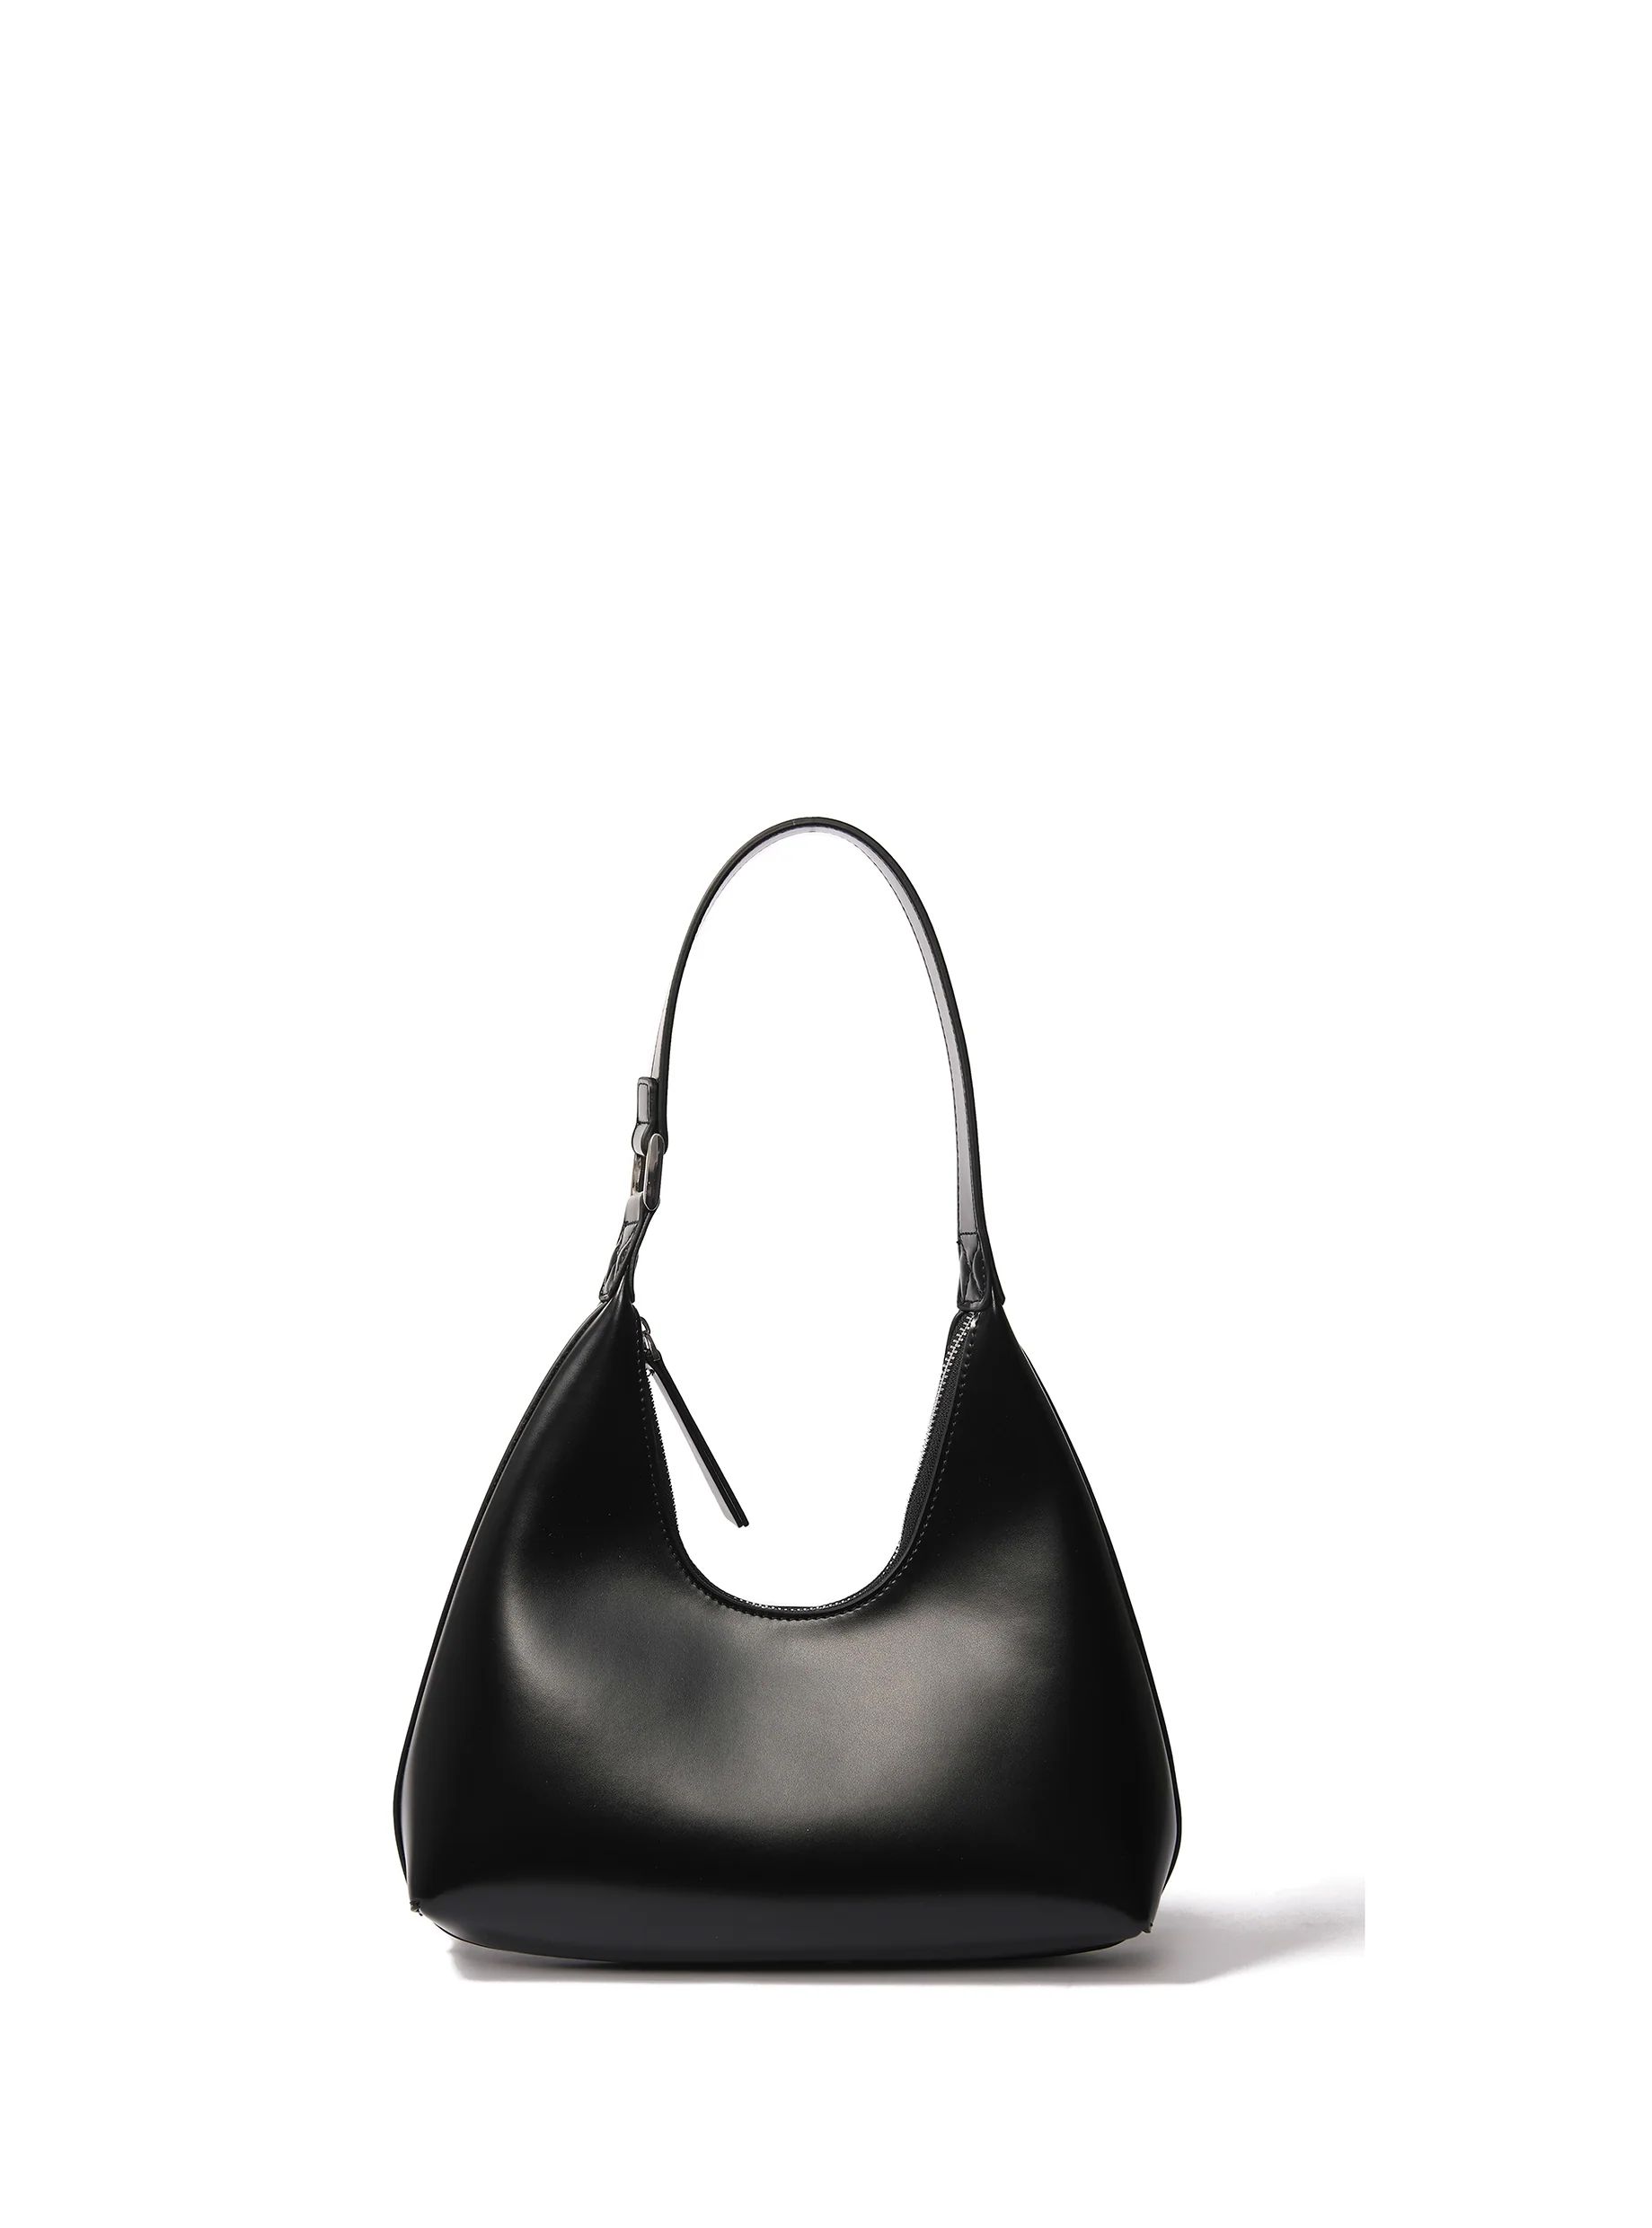 Alexia Bag in Smooth Leather, Black | Bob Ore Blue Collection